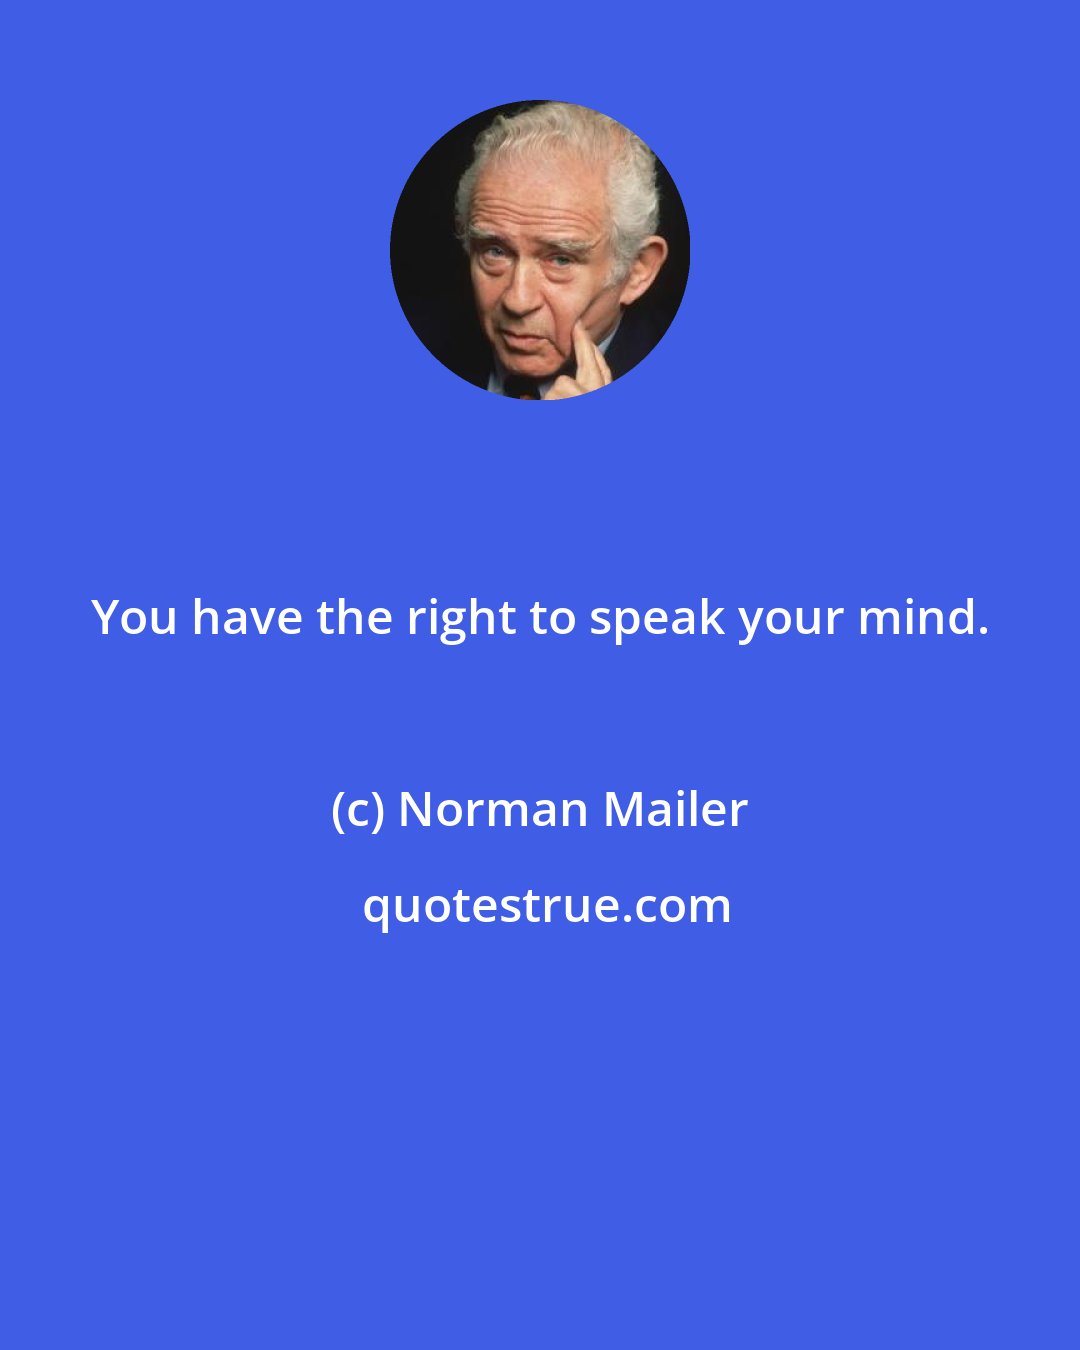 Norman Mailer: You have the right to speak your mind.